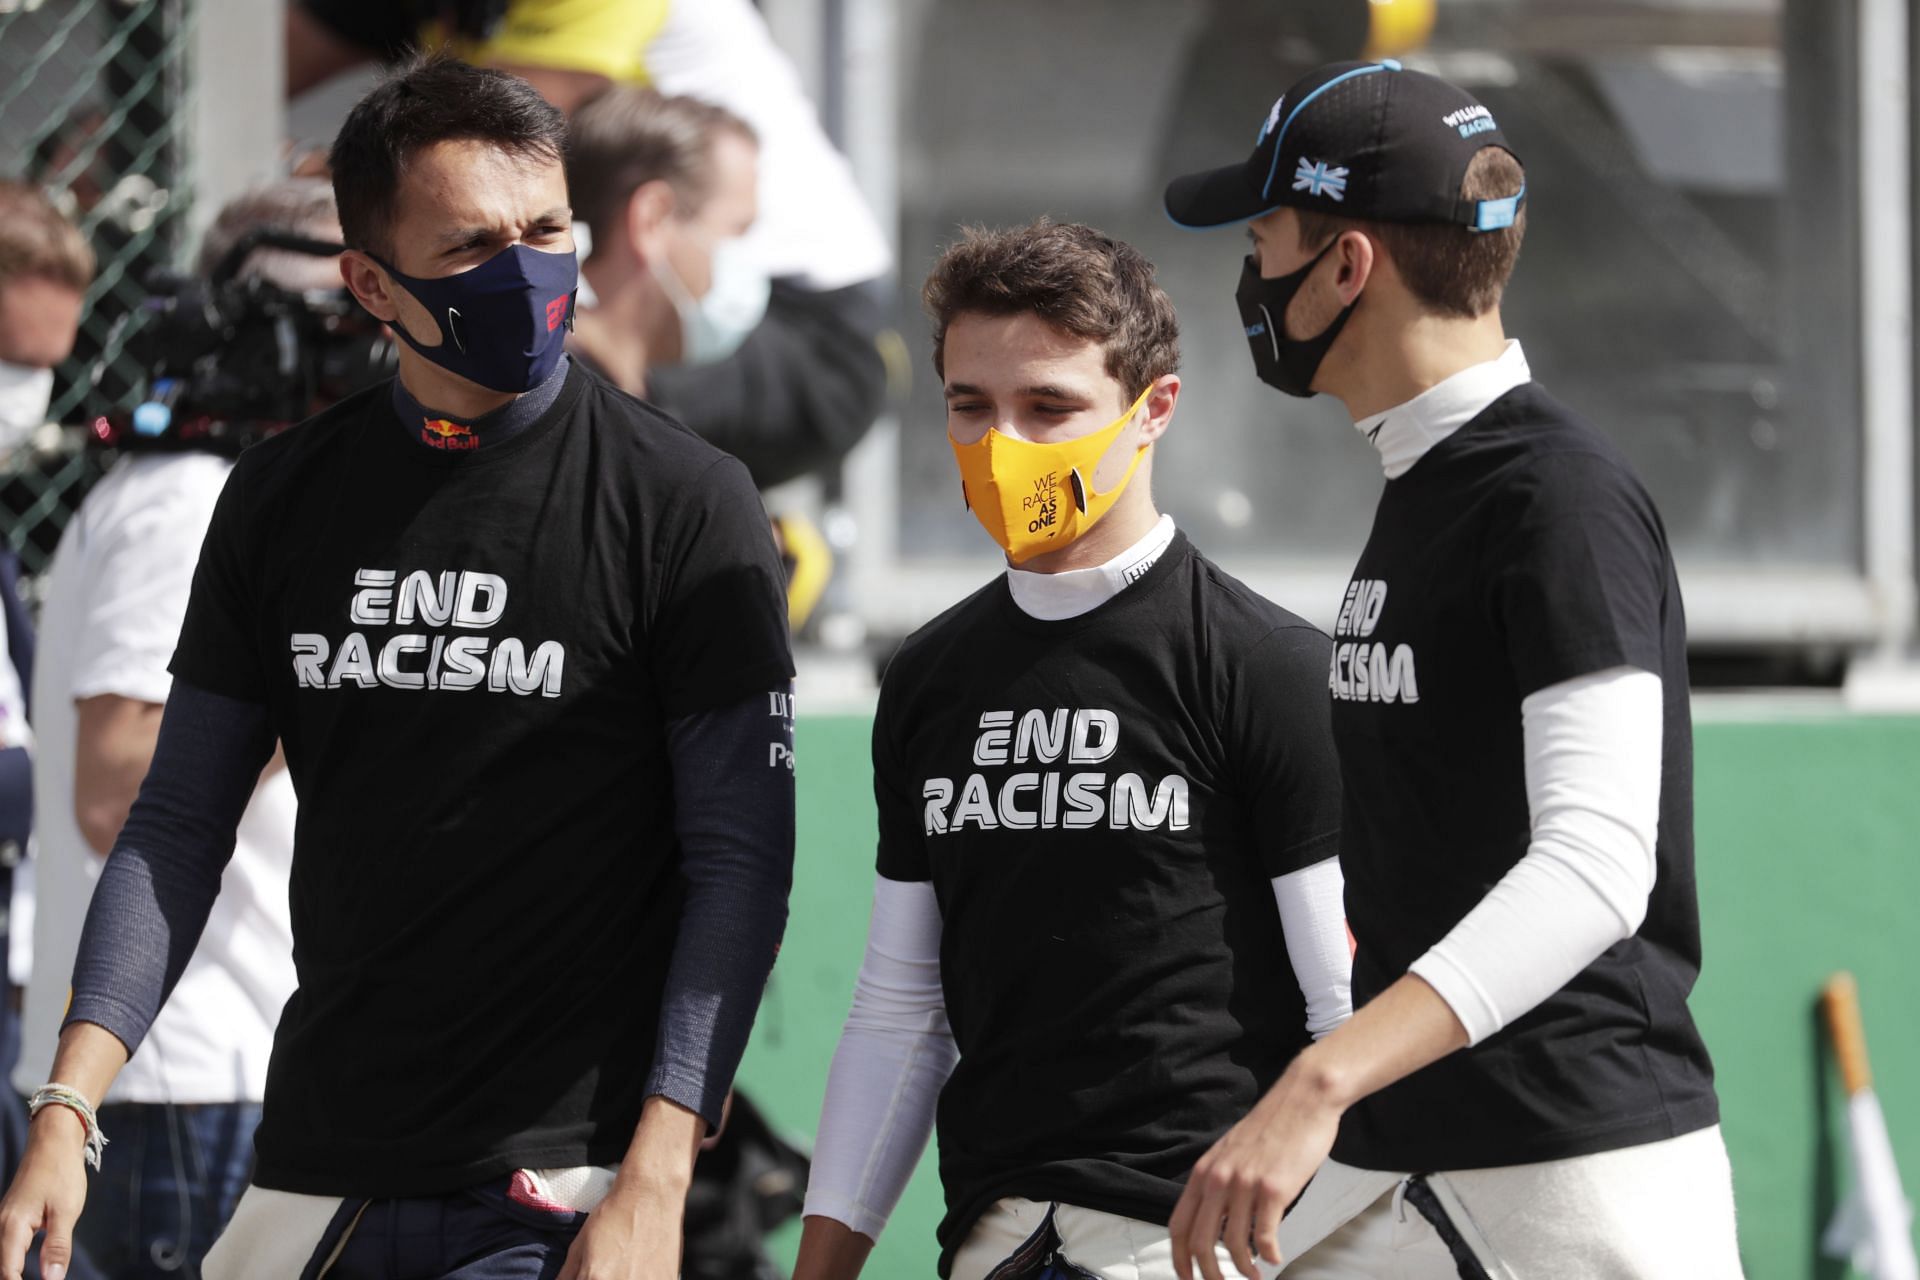 (L to R) Alexander Albon, Lando Norris, and George Russell talk on the grid before the F1 Grand Prix of Belgium at Circuit de Spa-Francorchamps on August 30, 2020, in Spa, Belgium (Photo by Stephanie Lecocq/Pool via Getty Images)